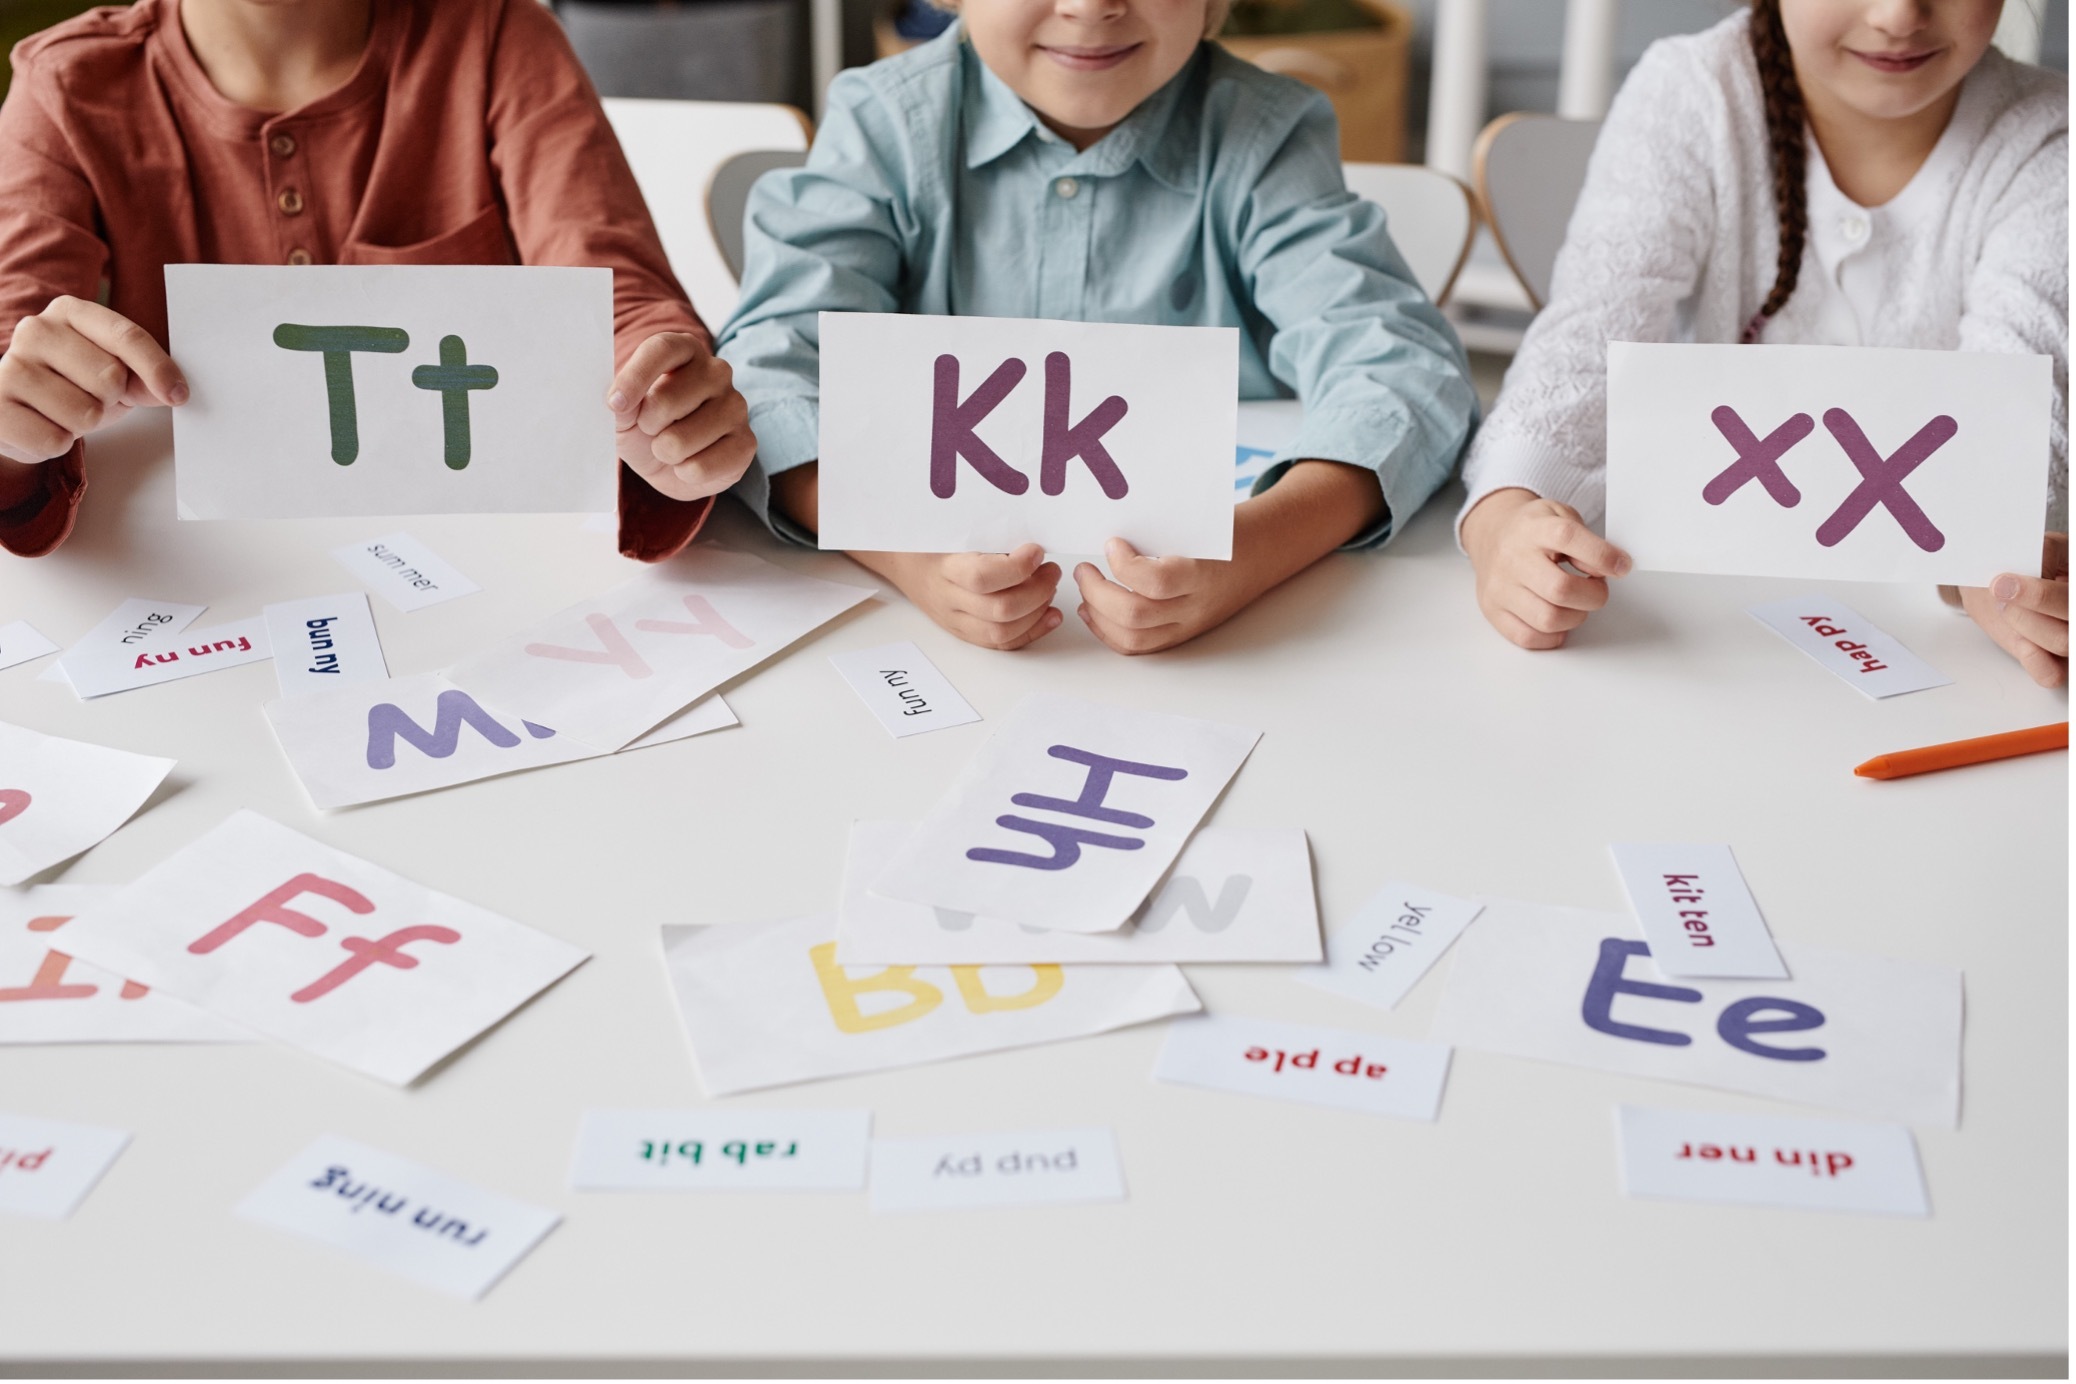 The importance of Disciplinary Literacy in addressing the Post-pandemic phonics gap